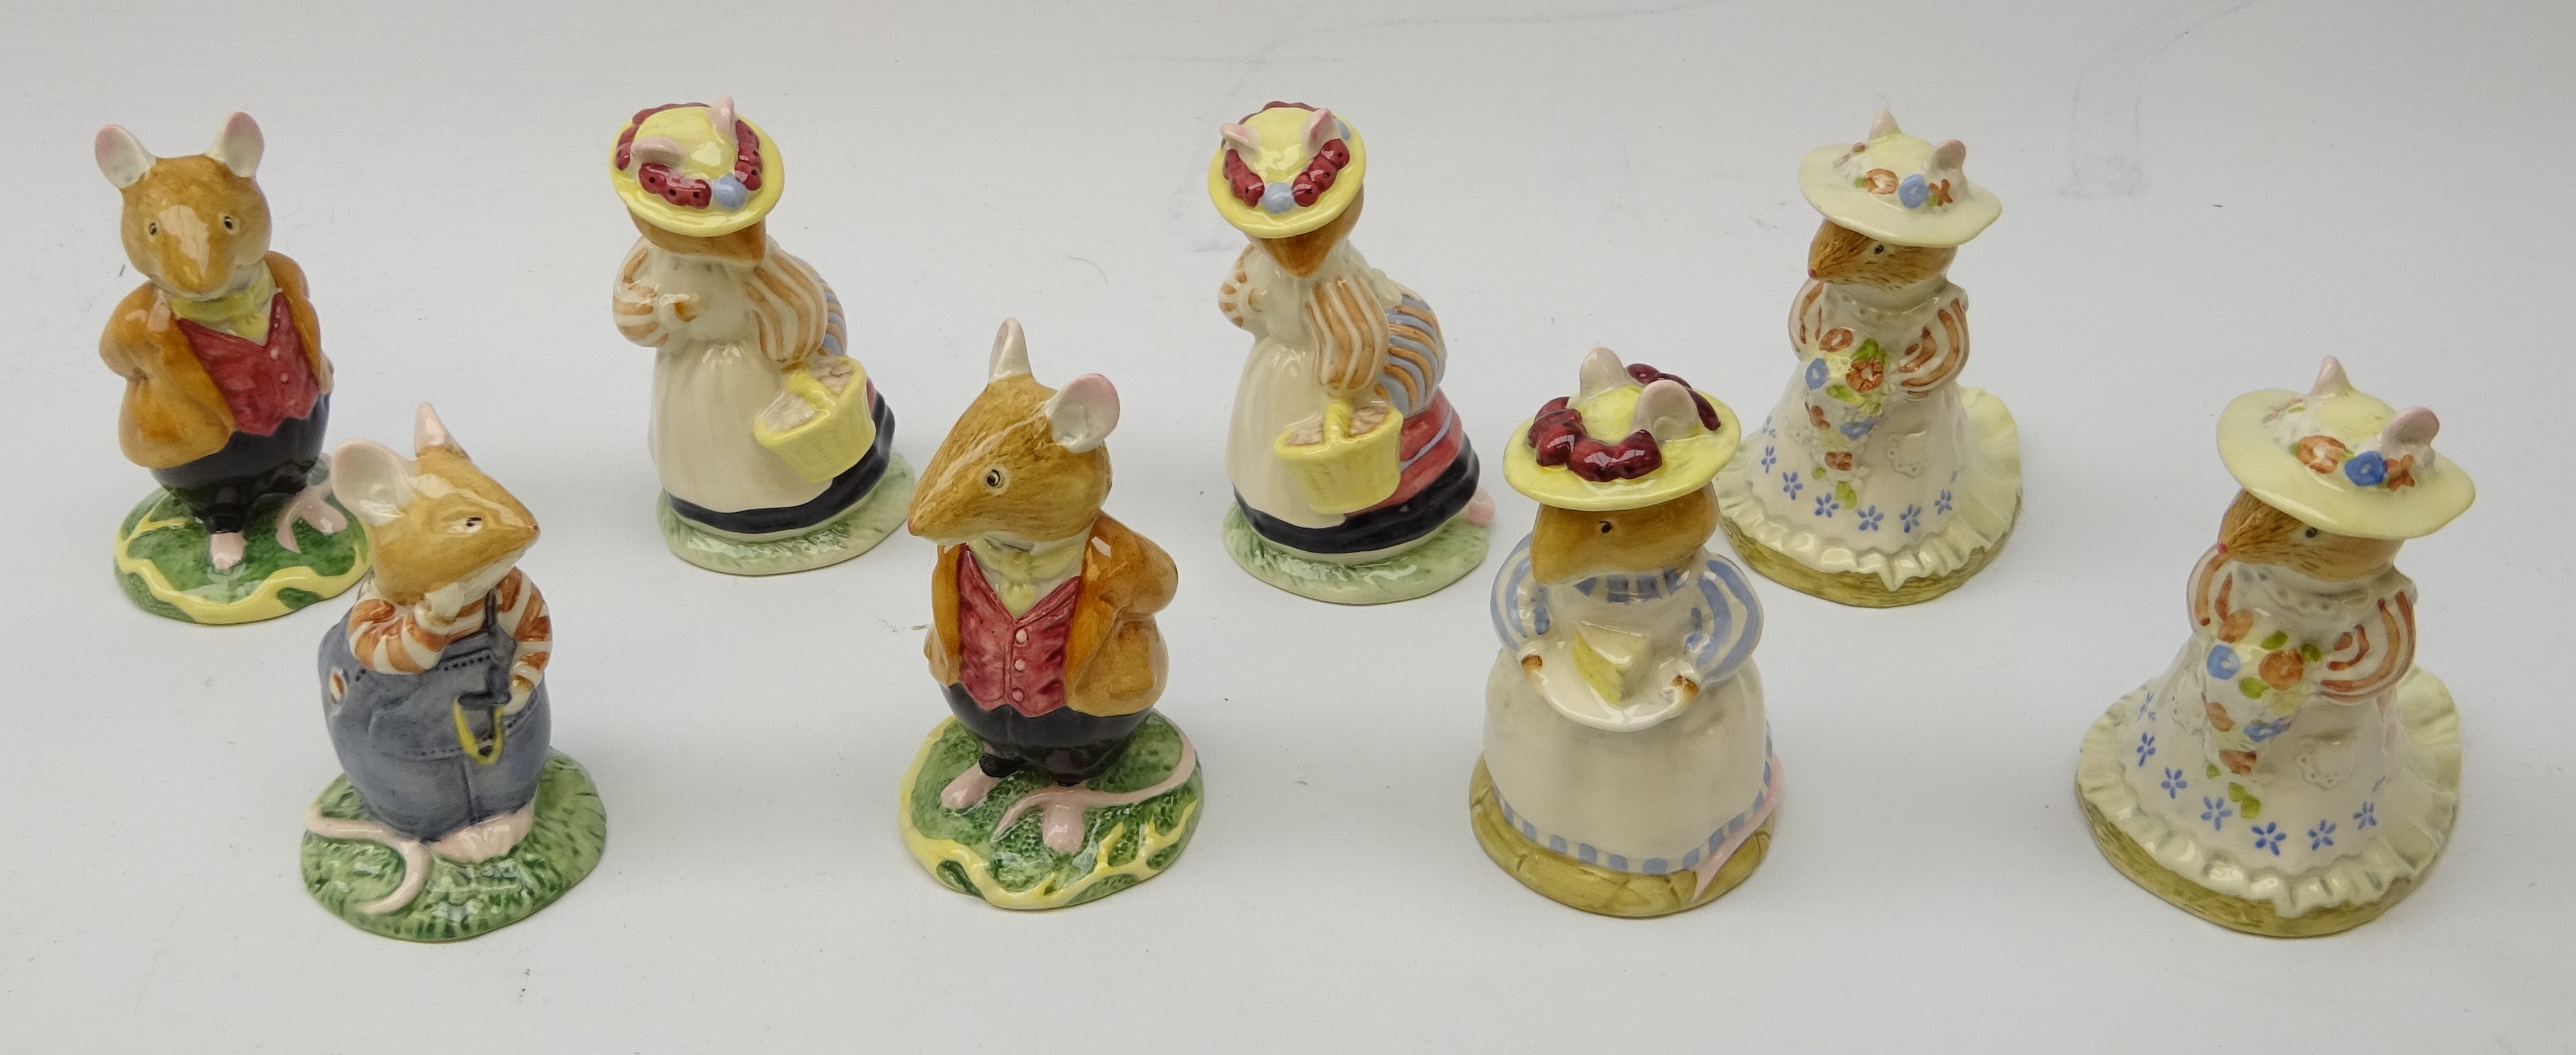 Eight Royal Doulton Brambly Hedge figures - two Lord Woodmouse, two Lady Woodmouse,